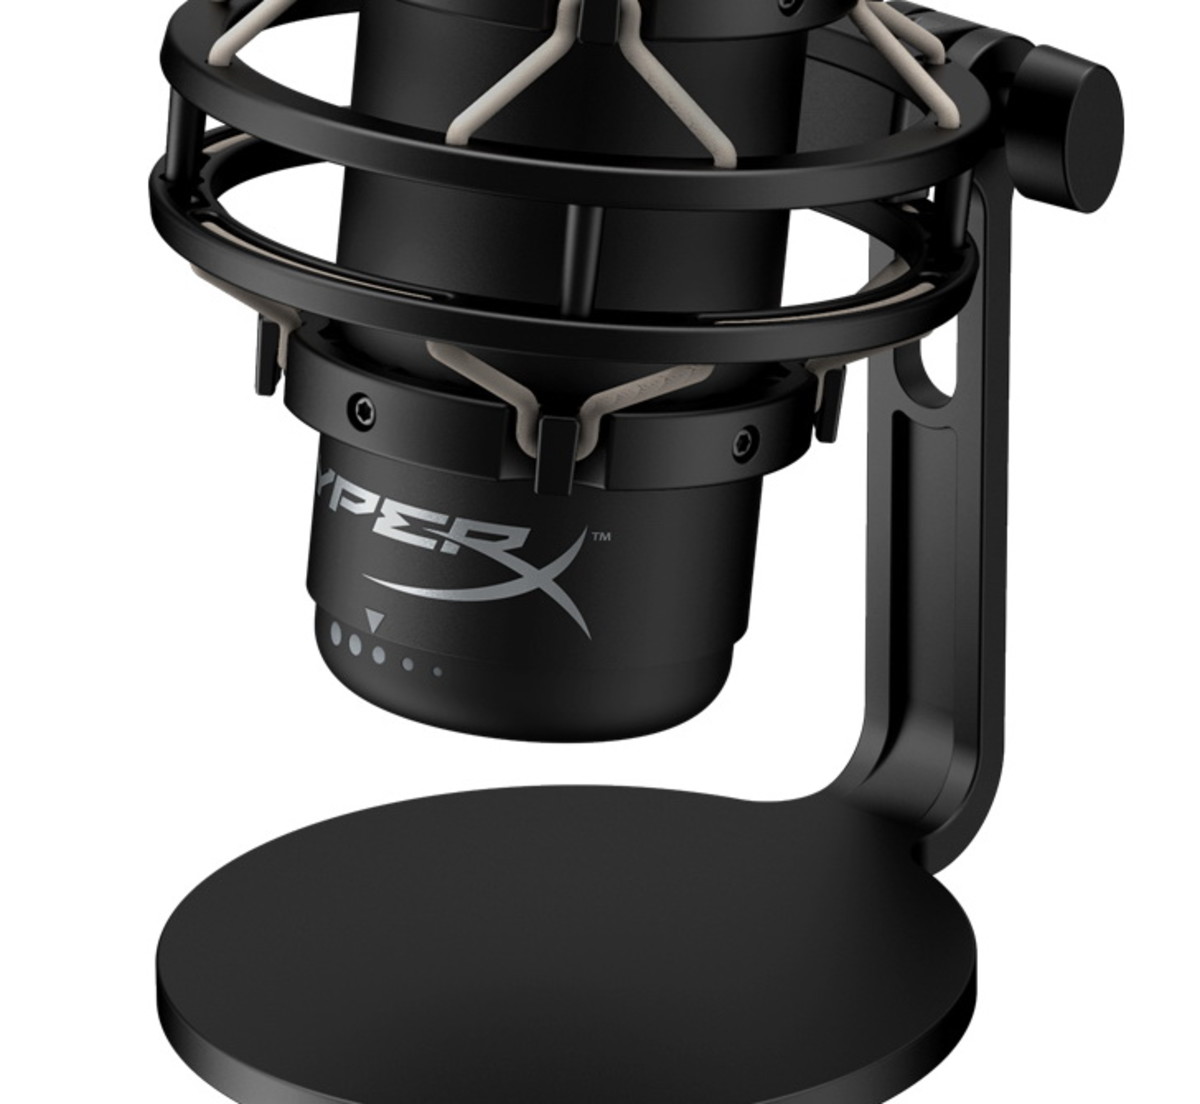 QuadCast S suspension shock mount and stand